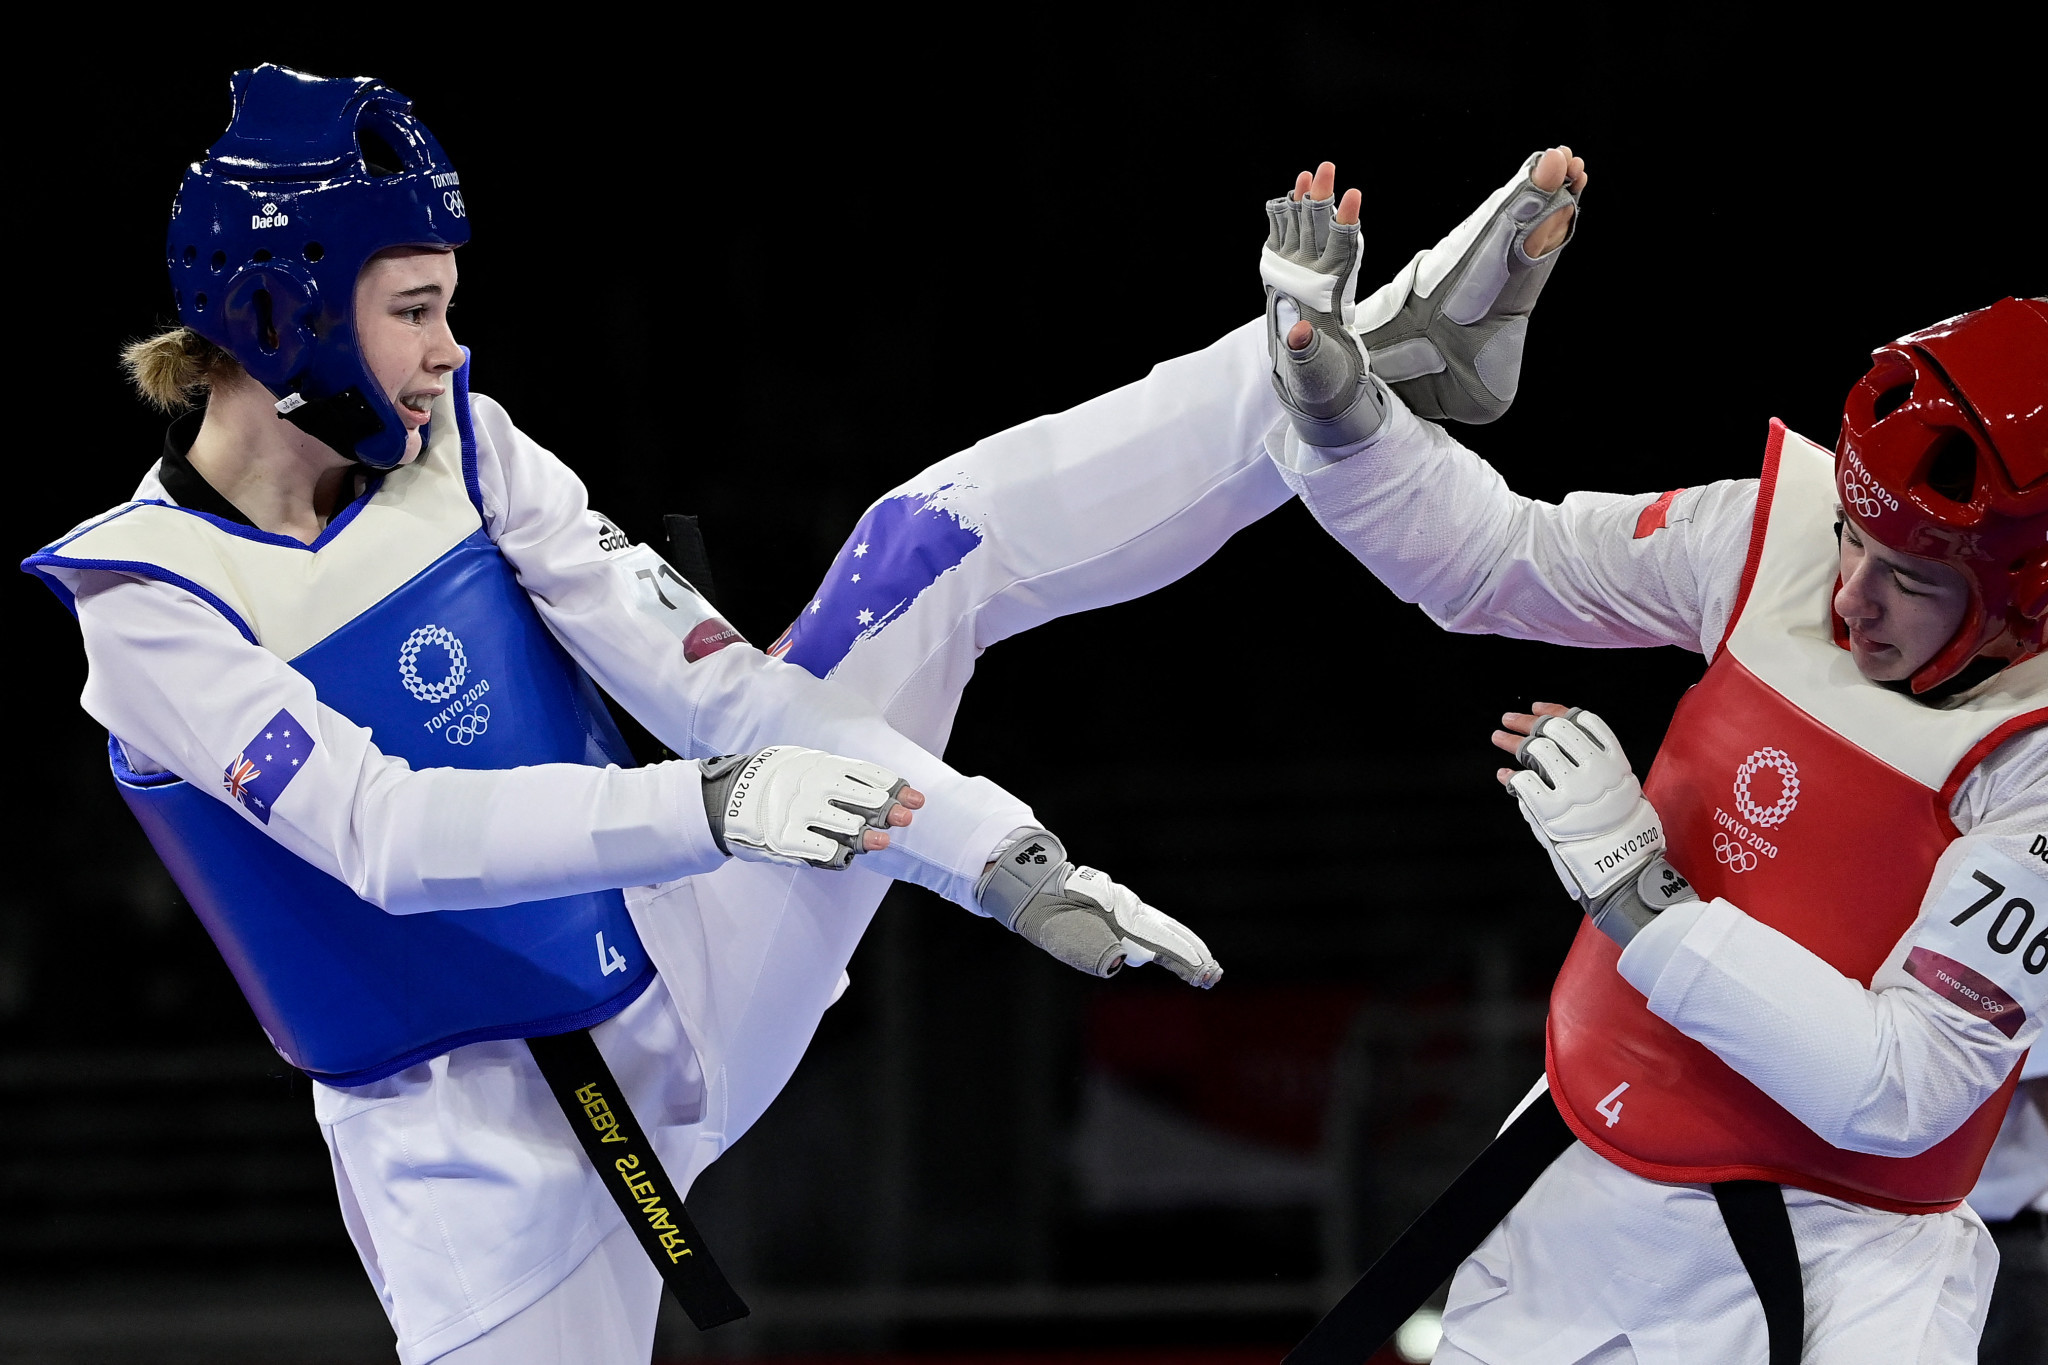 Reba Stewart was one of the four Australian taekwondo athletes to appear at Tokyo 2020 ©Getty Images